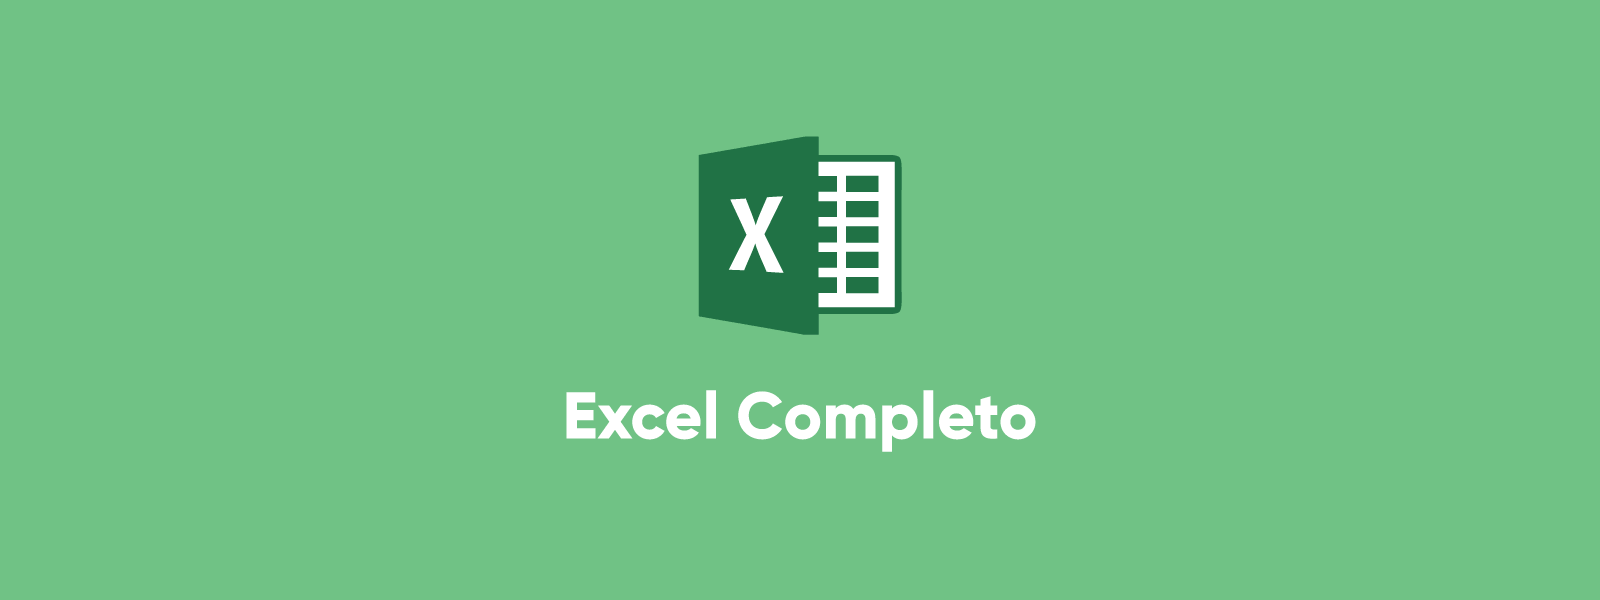 Pack Excel Completo